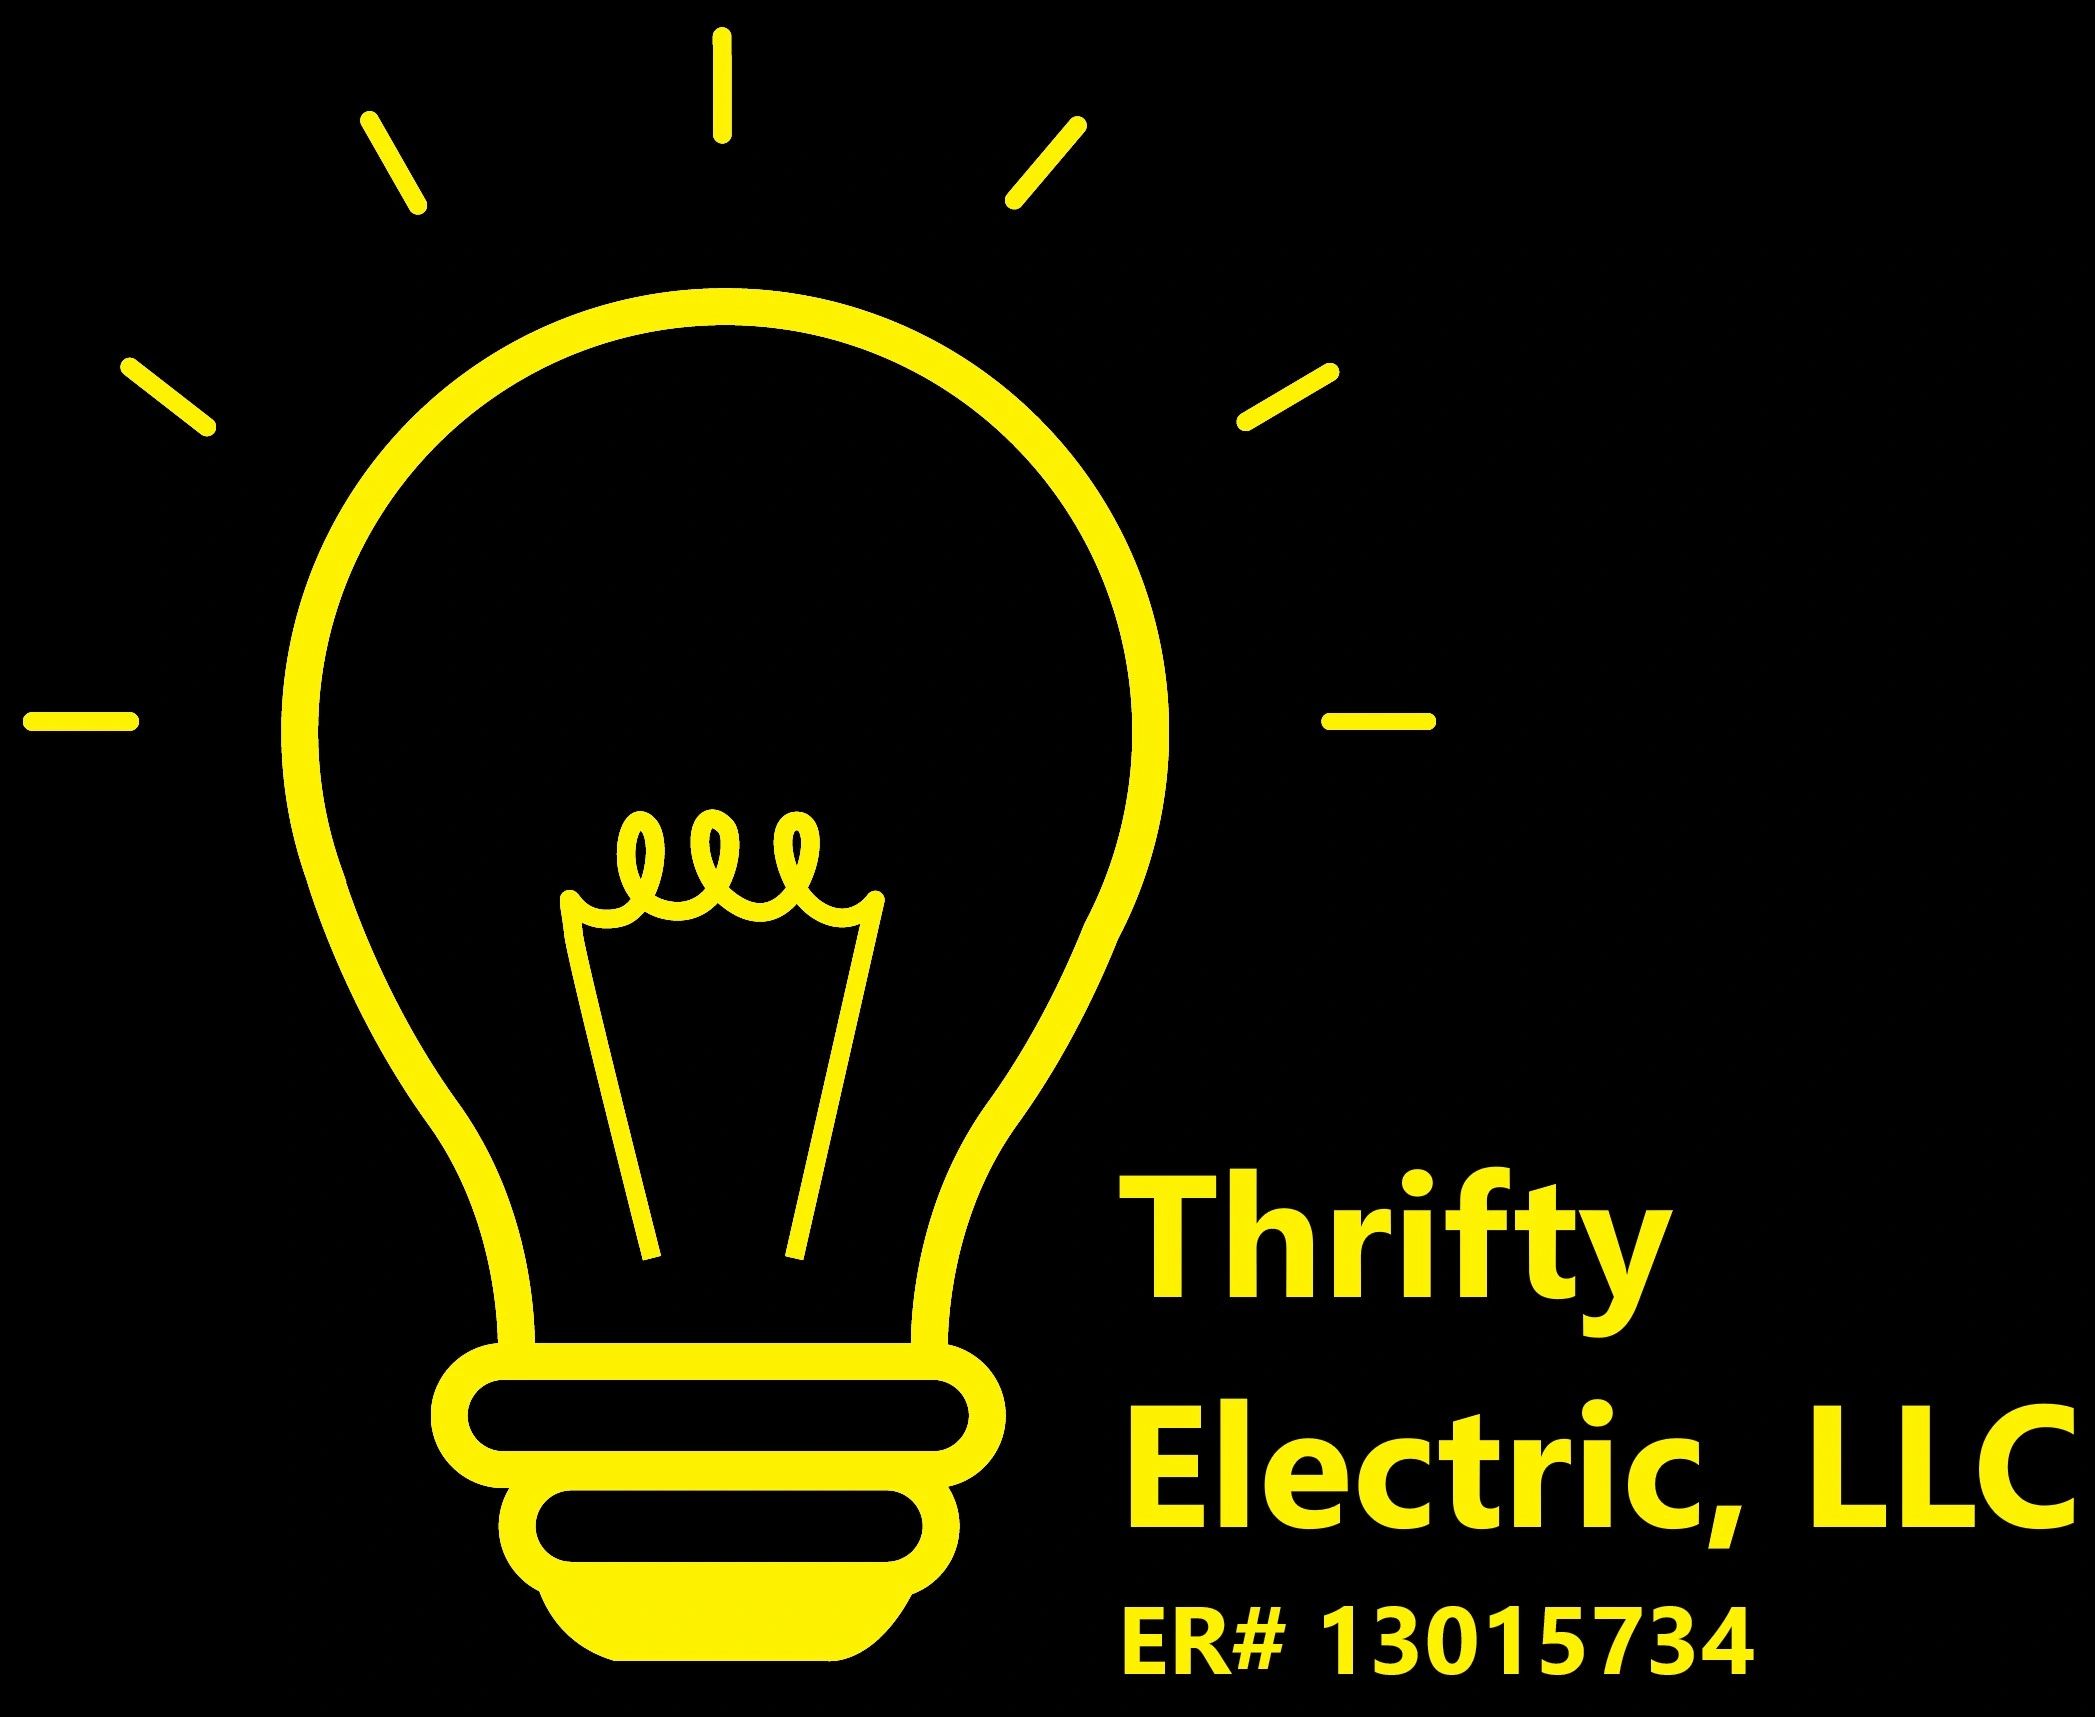 Thrifty Electric